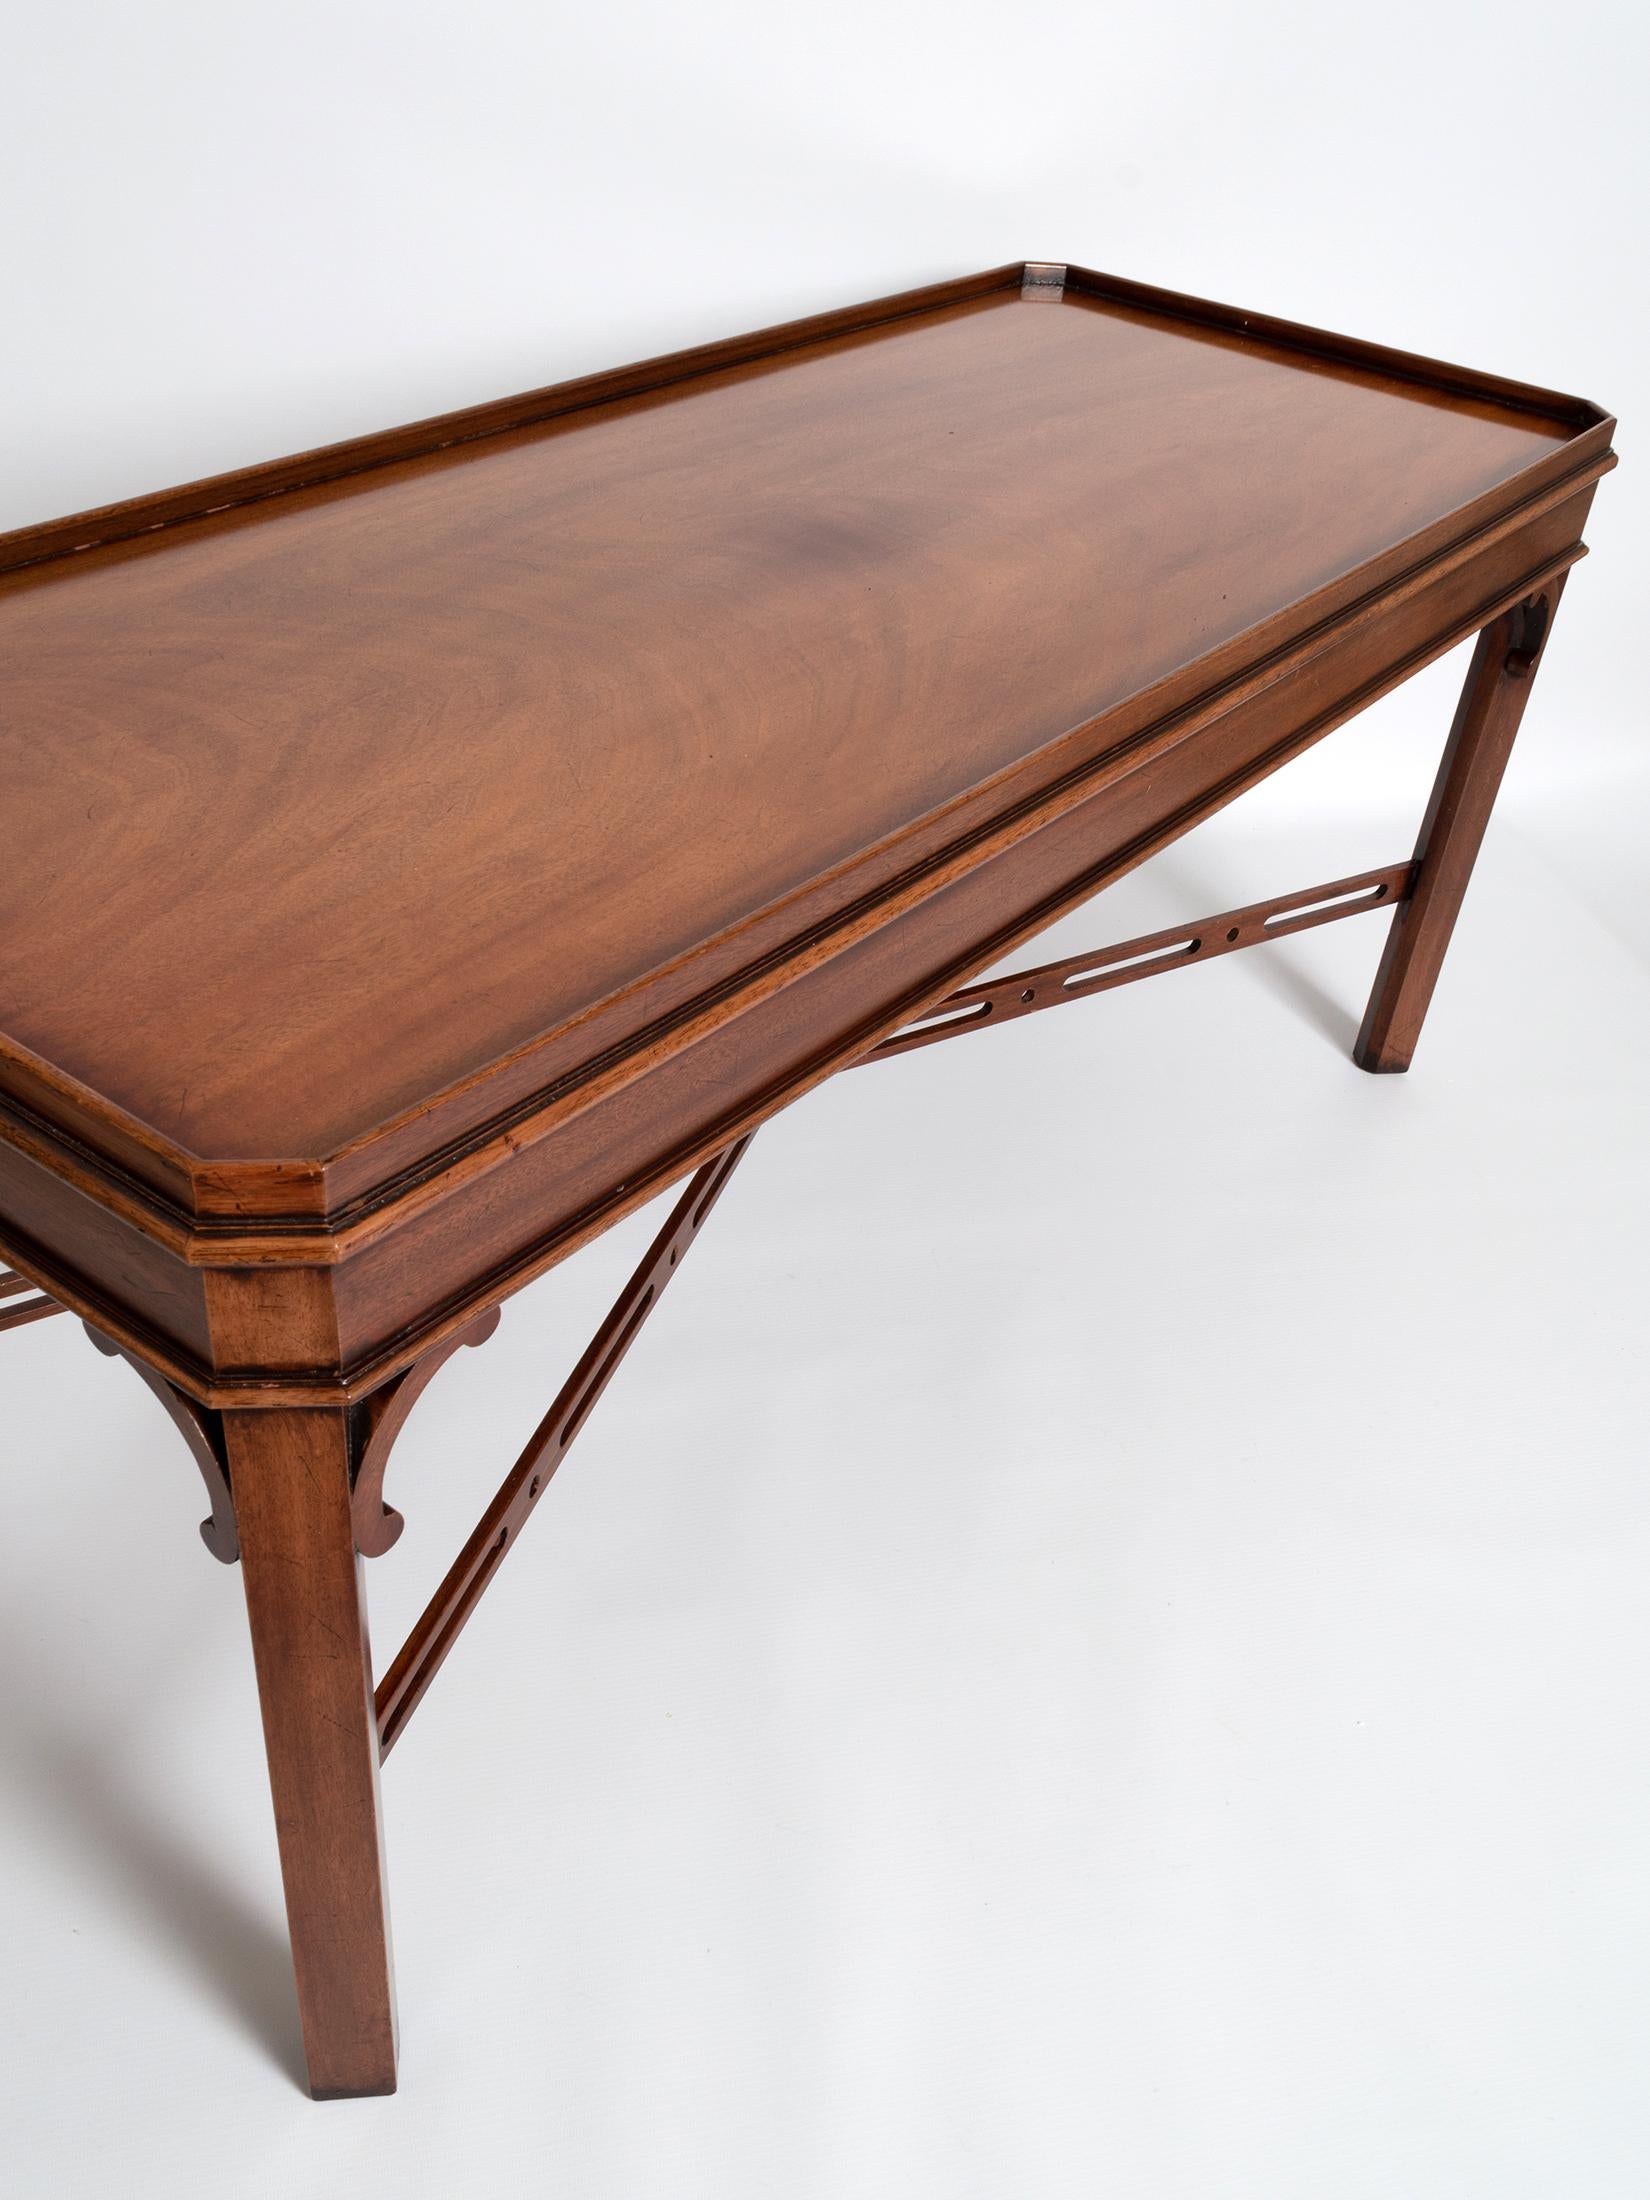 A solid mahogany George III Chippendale style coffee table by the fine English cabinet makers Brights of Nettlebed.

A fine piece with attractive fretwork detailing.

In very good condition commensurate of age and use.